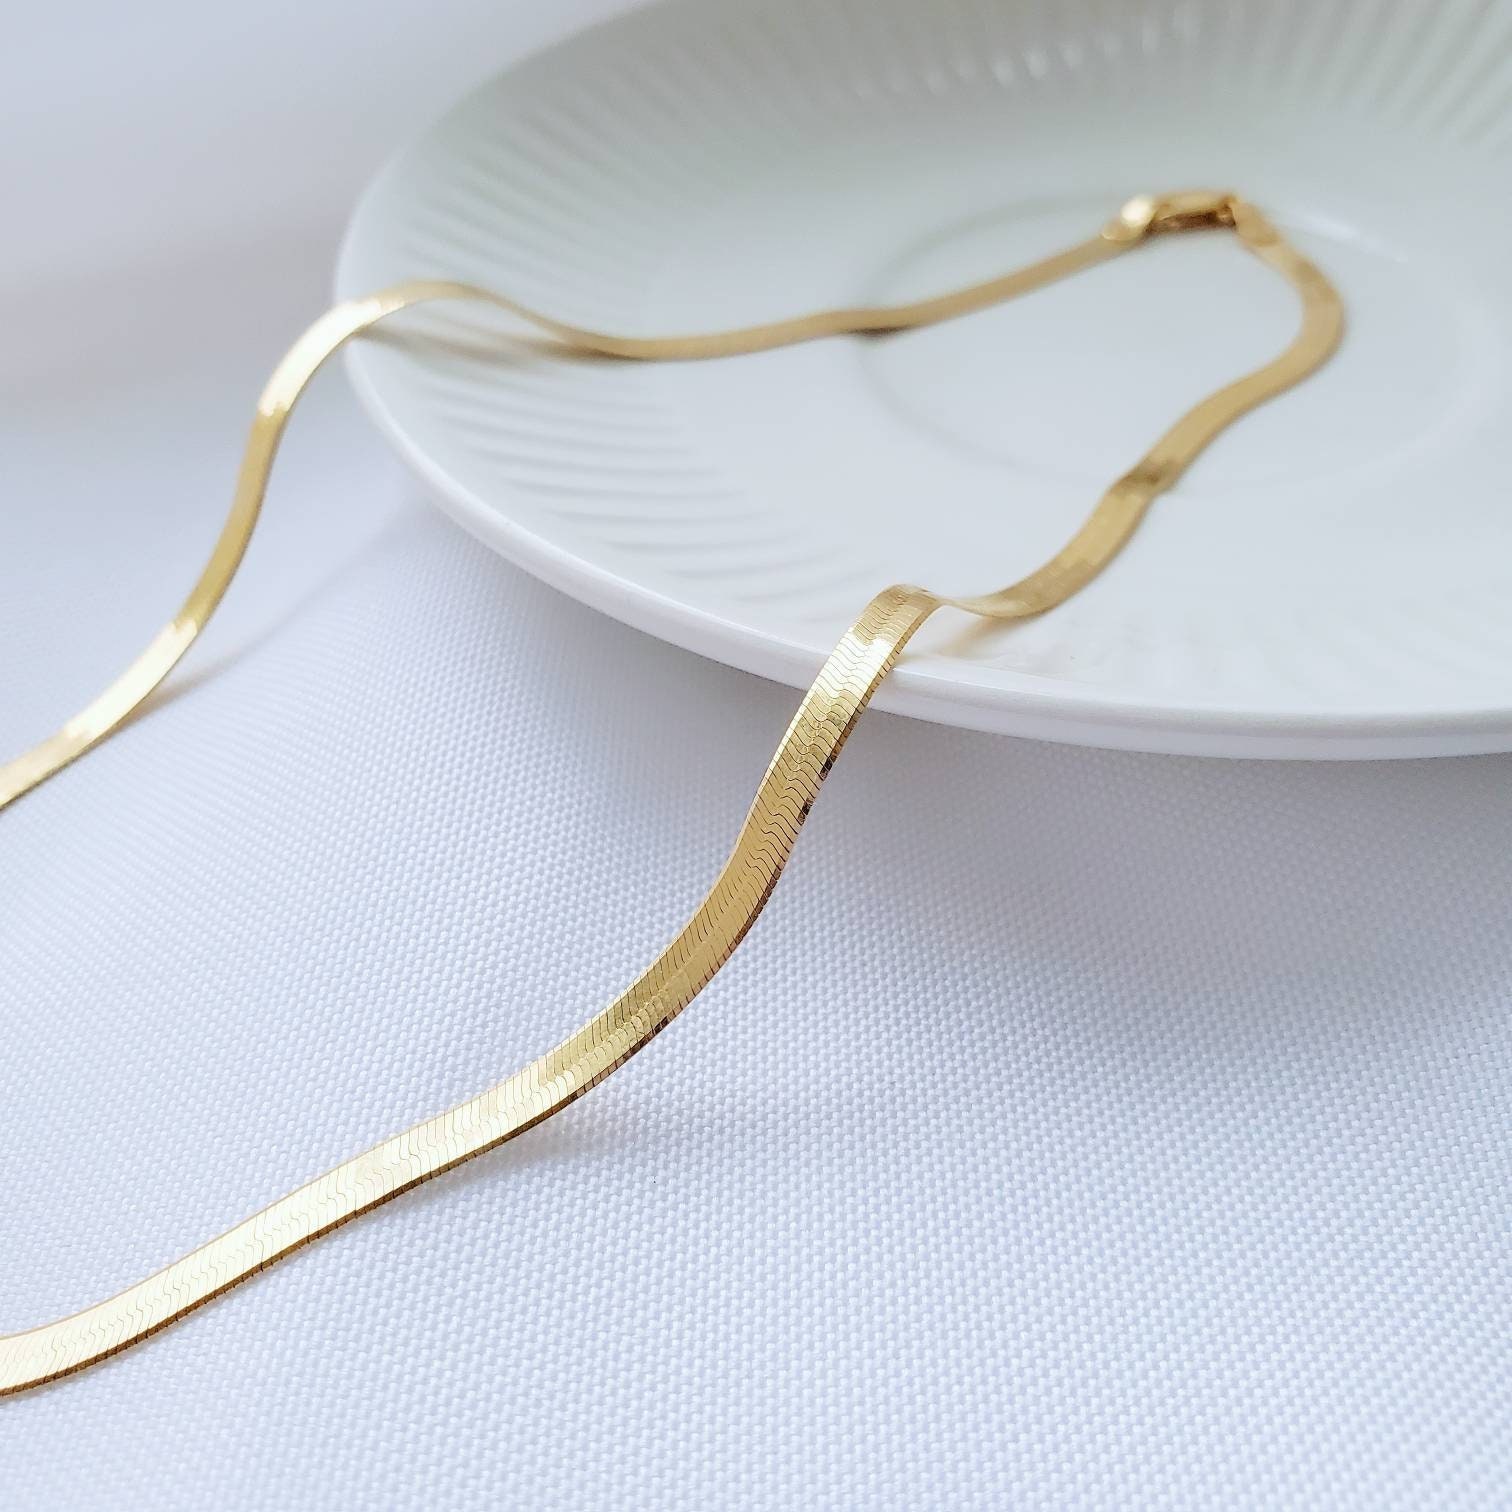 Linjer Snake Chain Necklace, Gold Vermeil